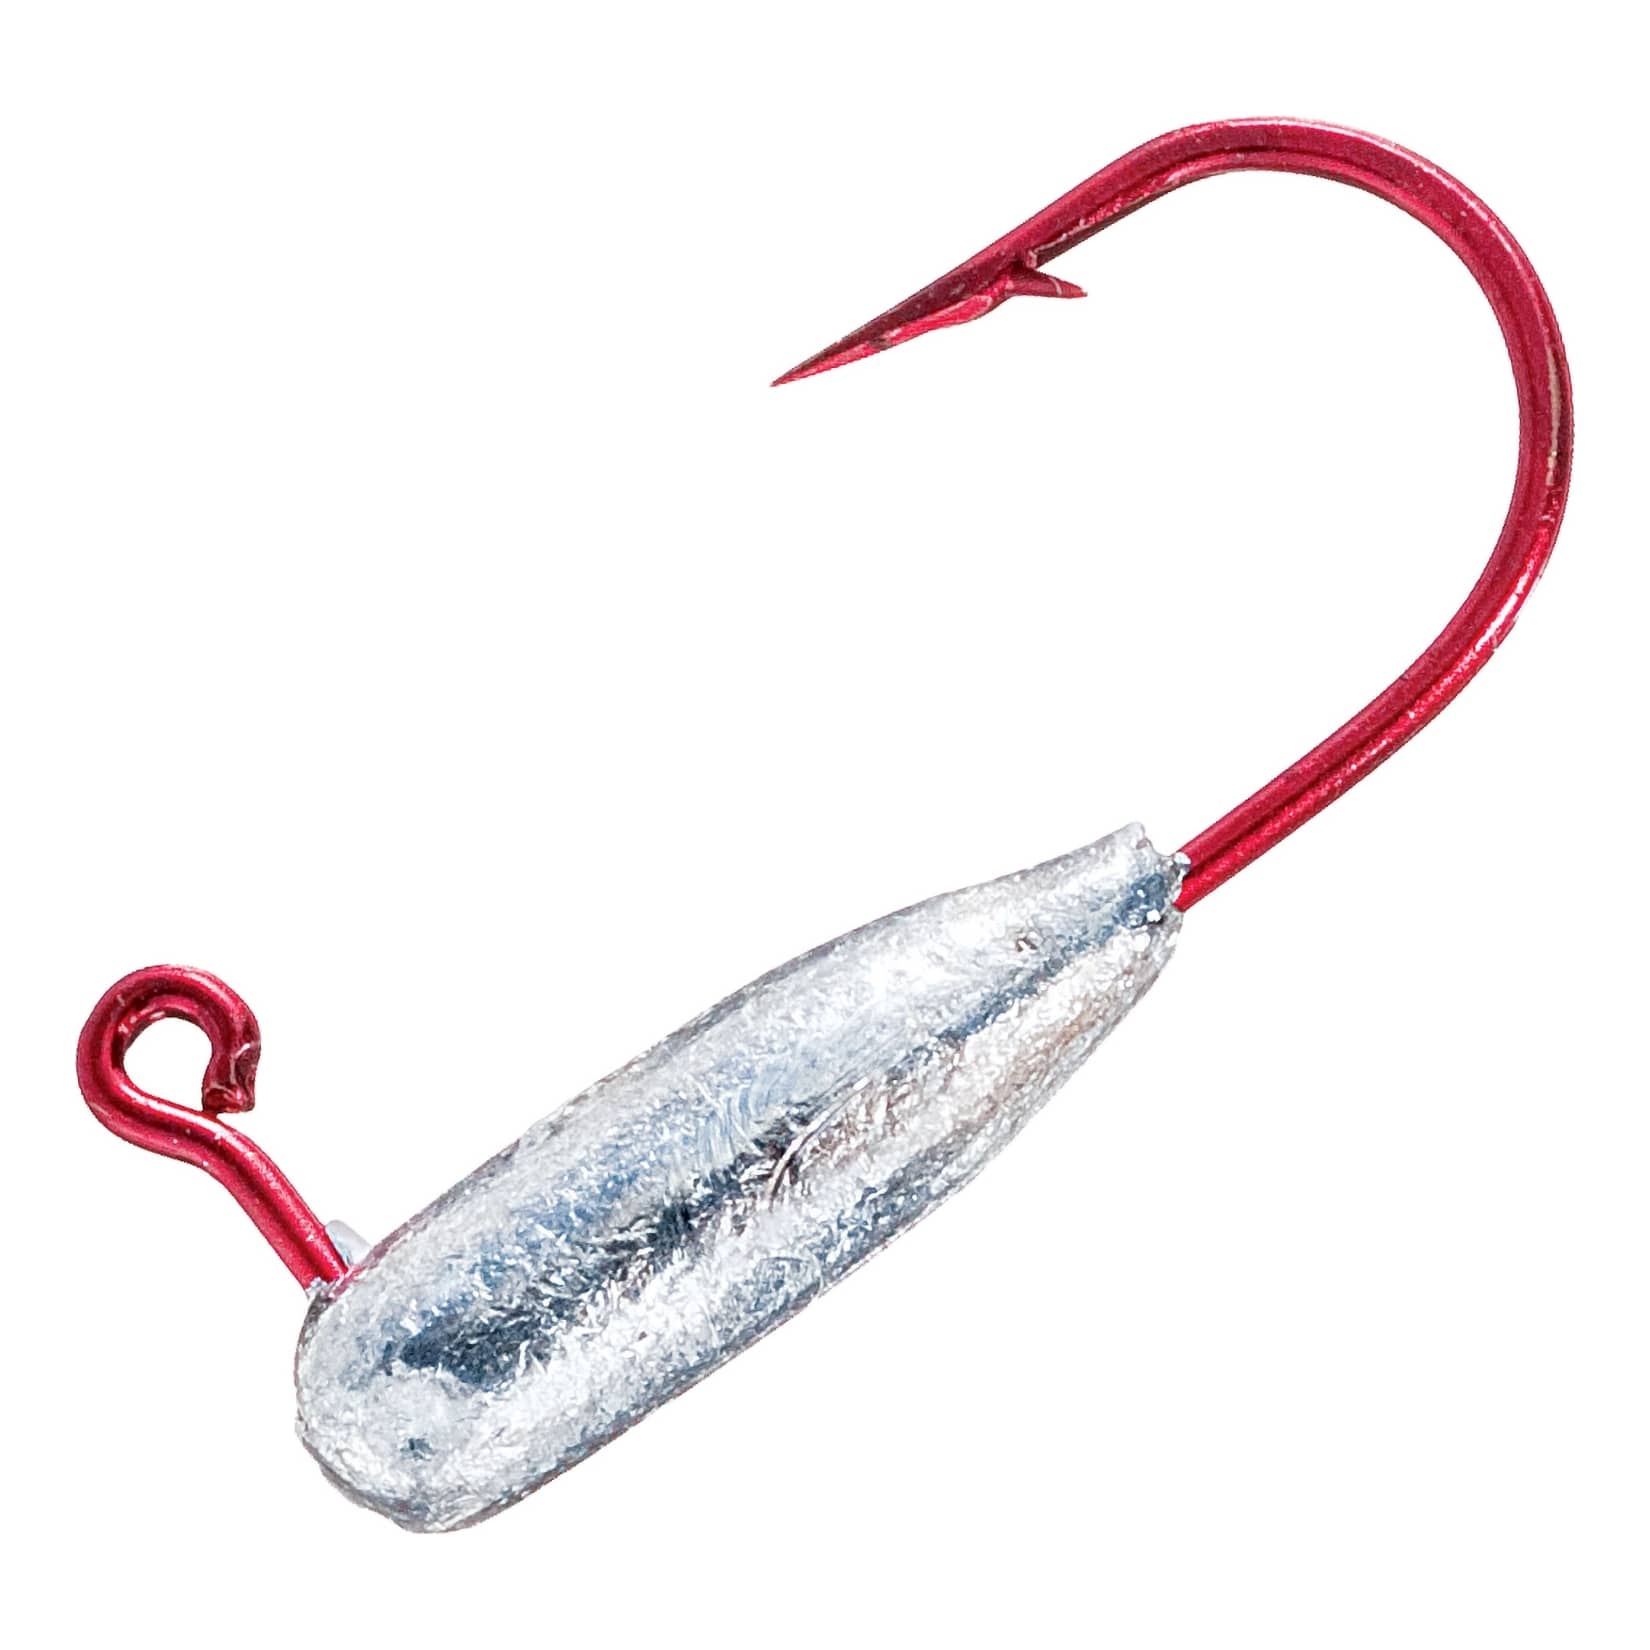 Bass Pro Shops Squirt Head with Red Hook Lead Heads - Cabelas - BASS